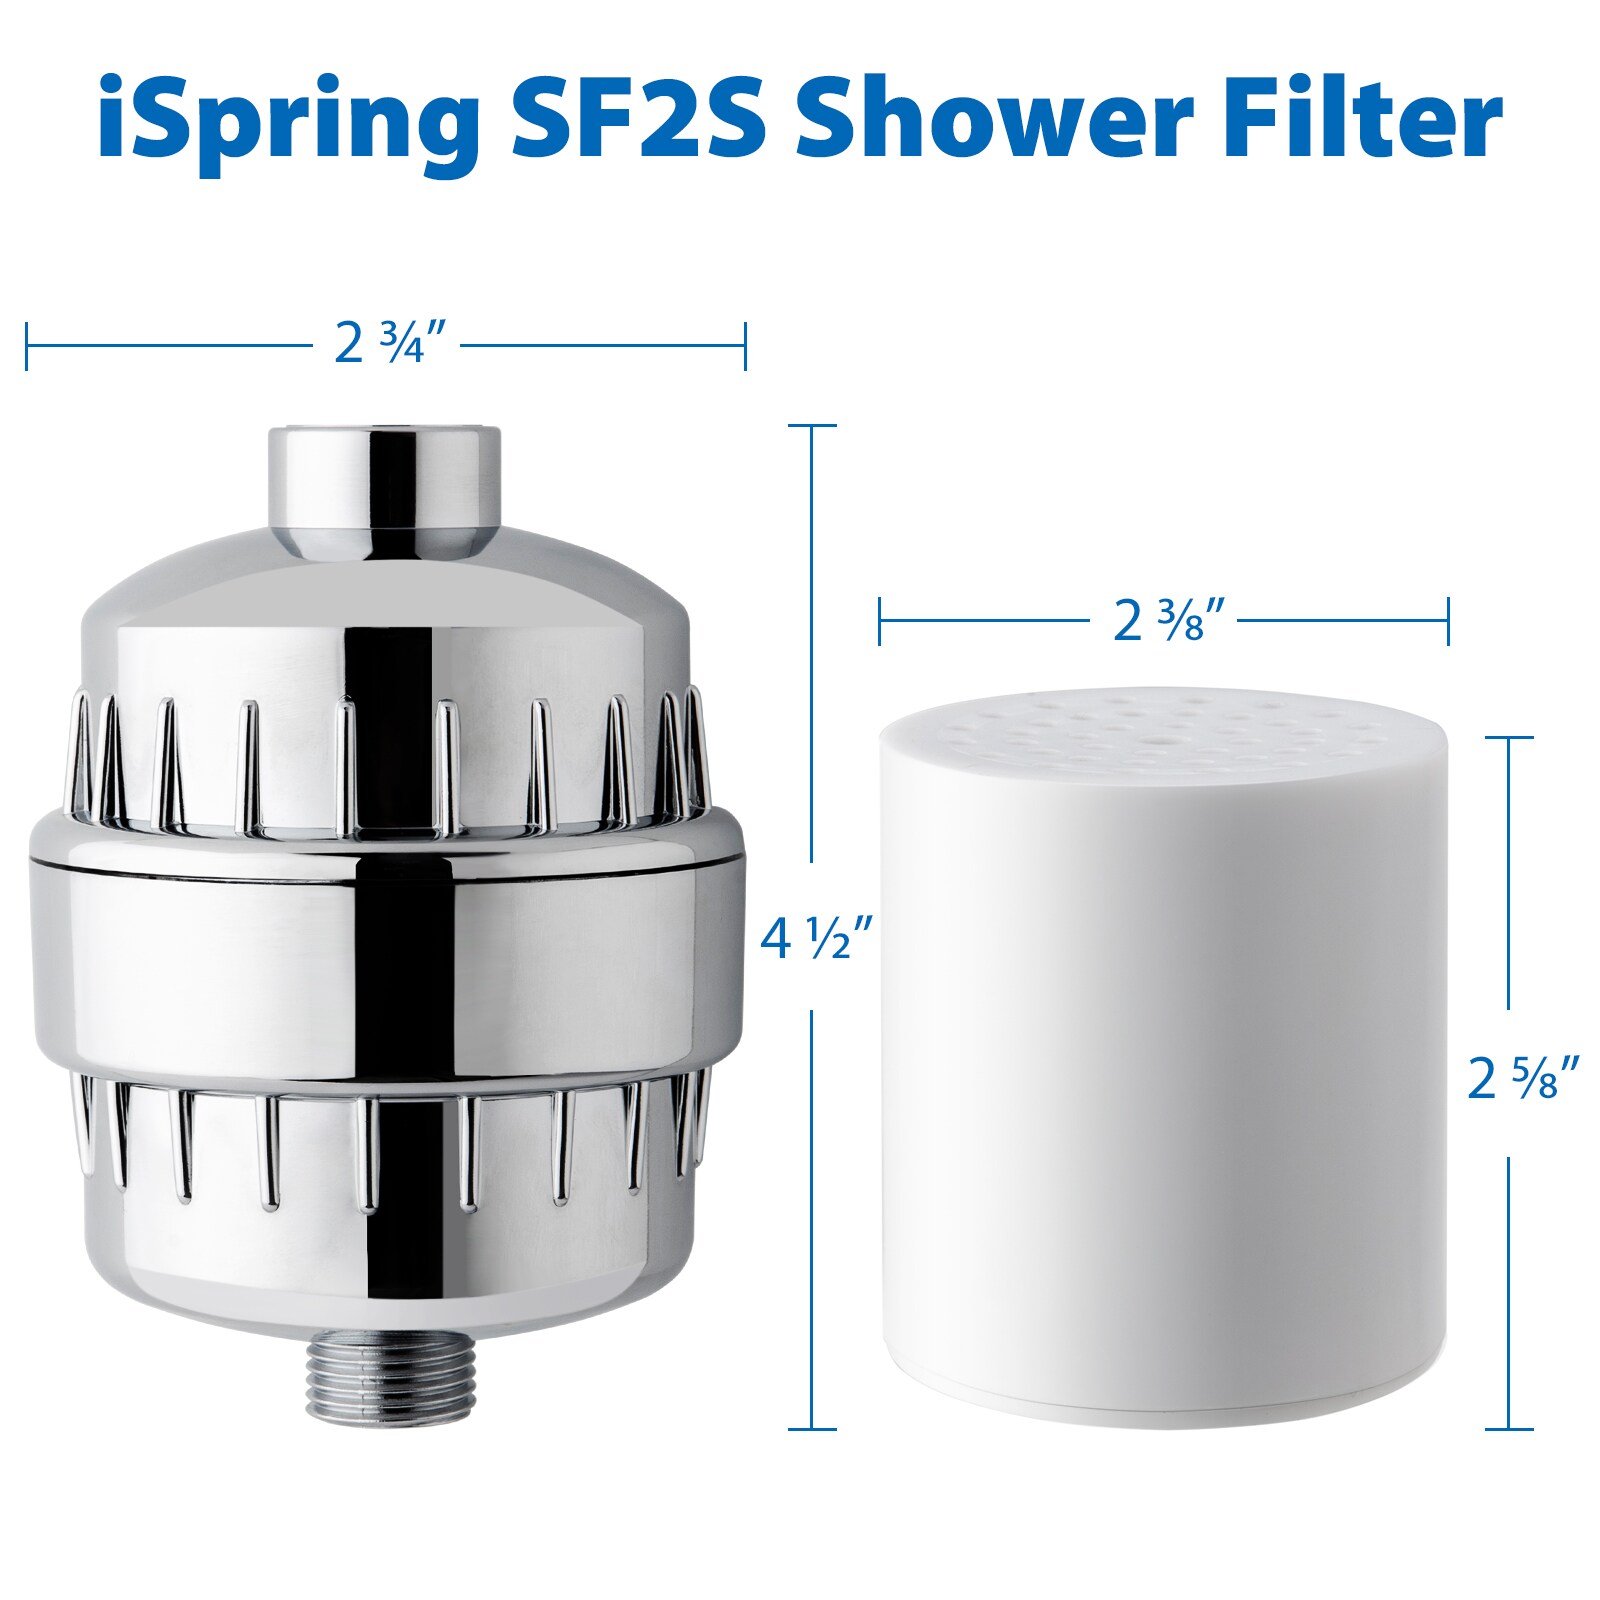 Mist Compact Chrome Filtering Shower Head, Replaceable Filter 15 Stage  Filtration System Removes Chlorine and Bad Odor, MSS082 at Tractor Supply  Co.